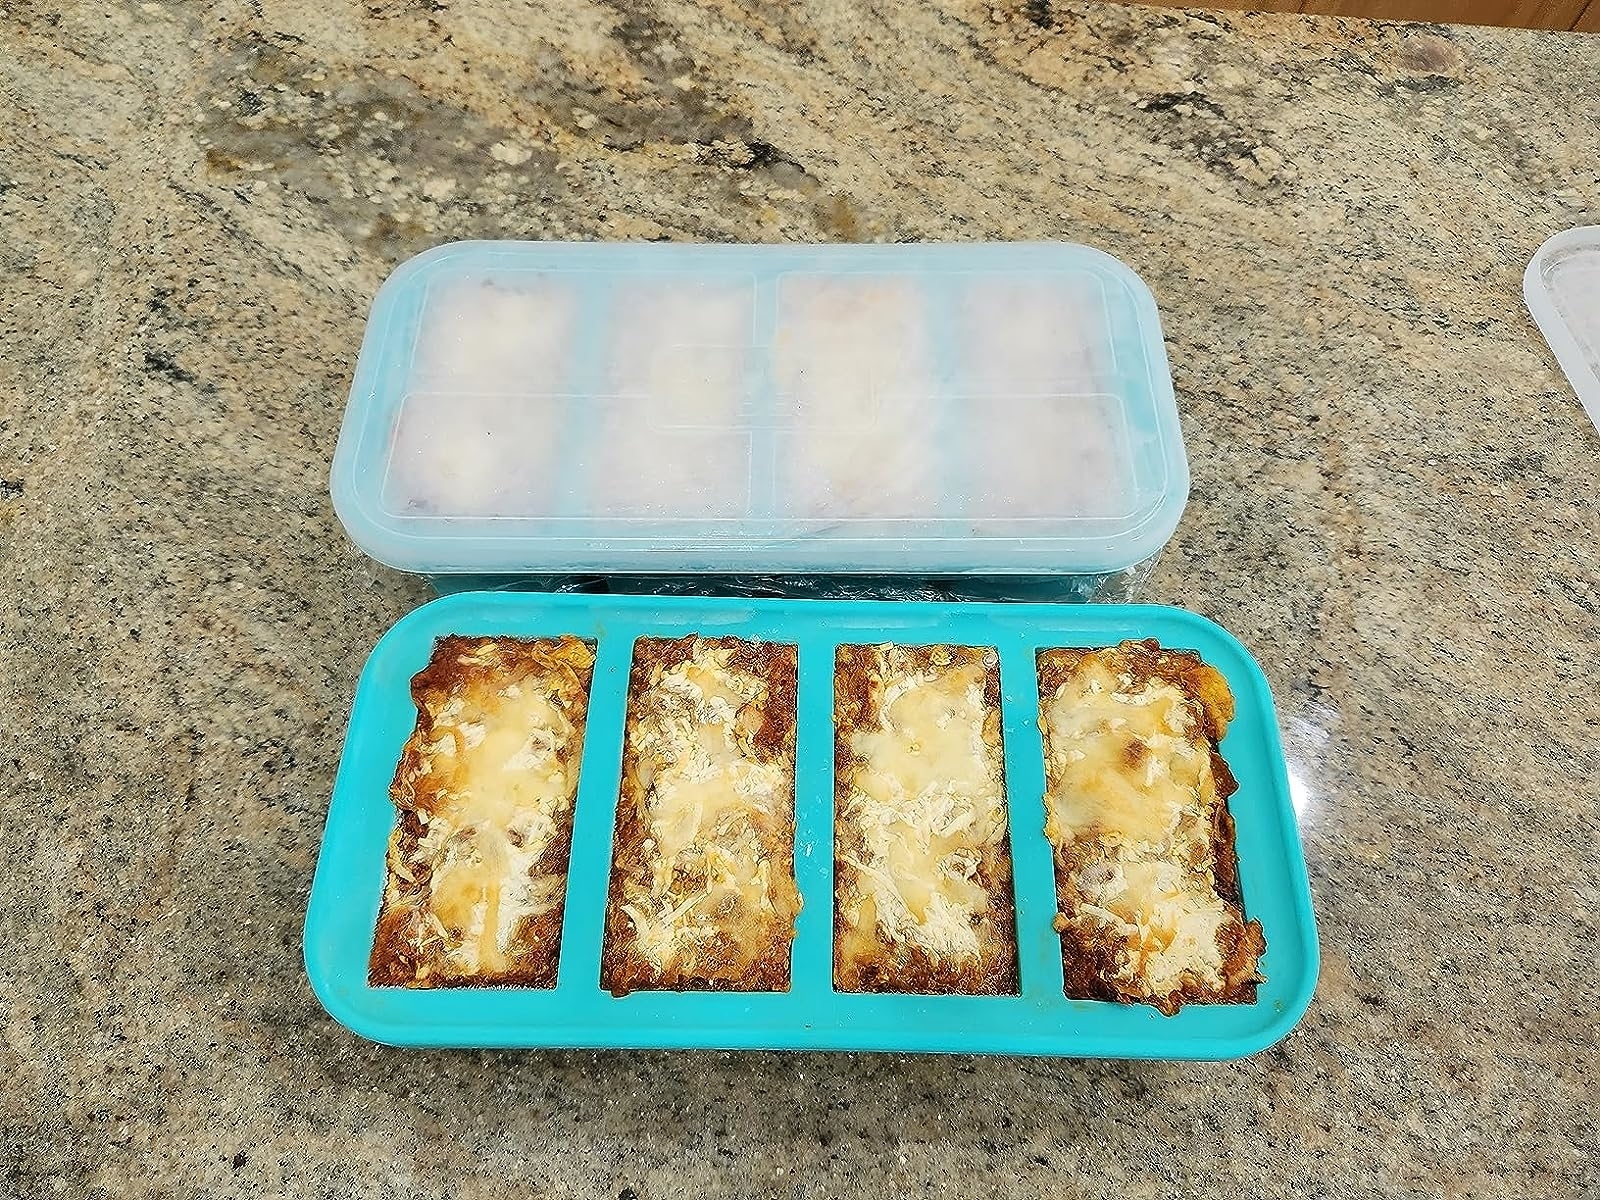 Reviewer image of leftovers in freezer tray